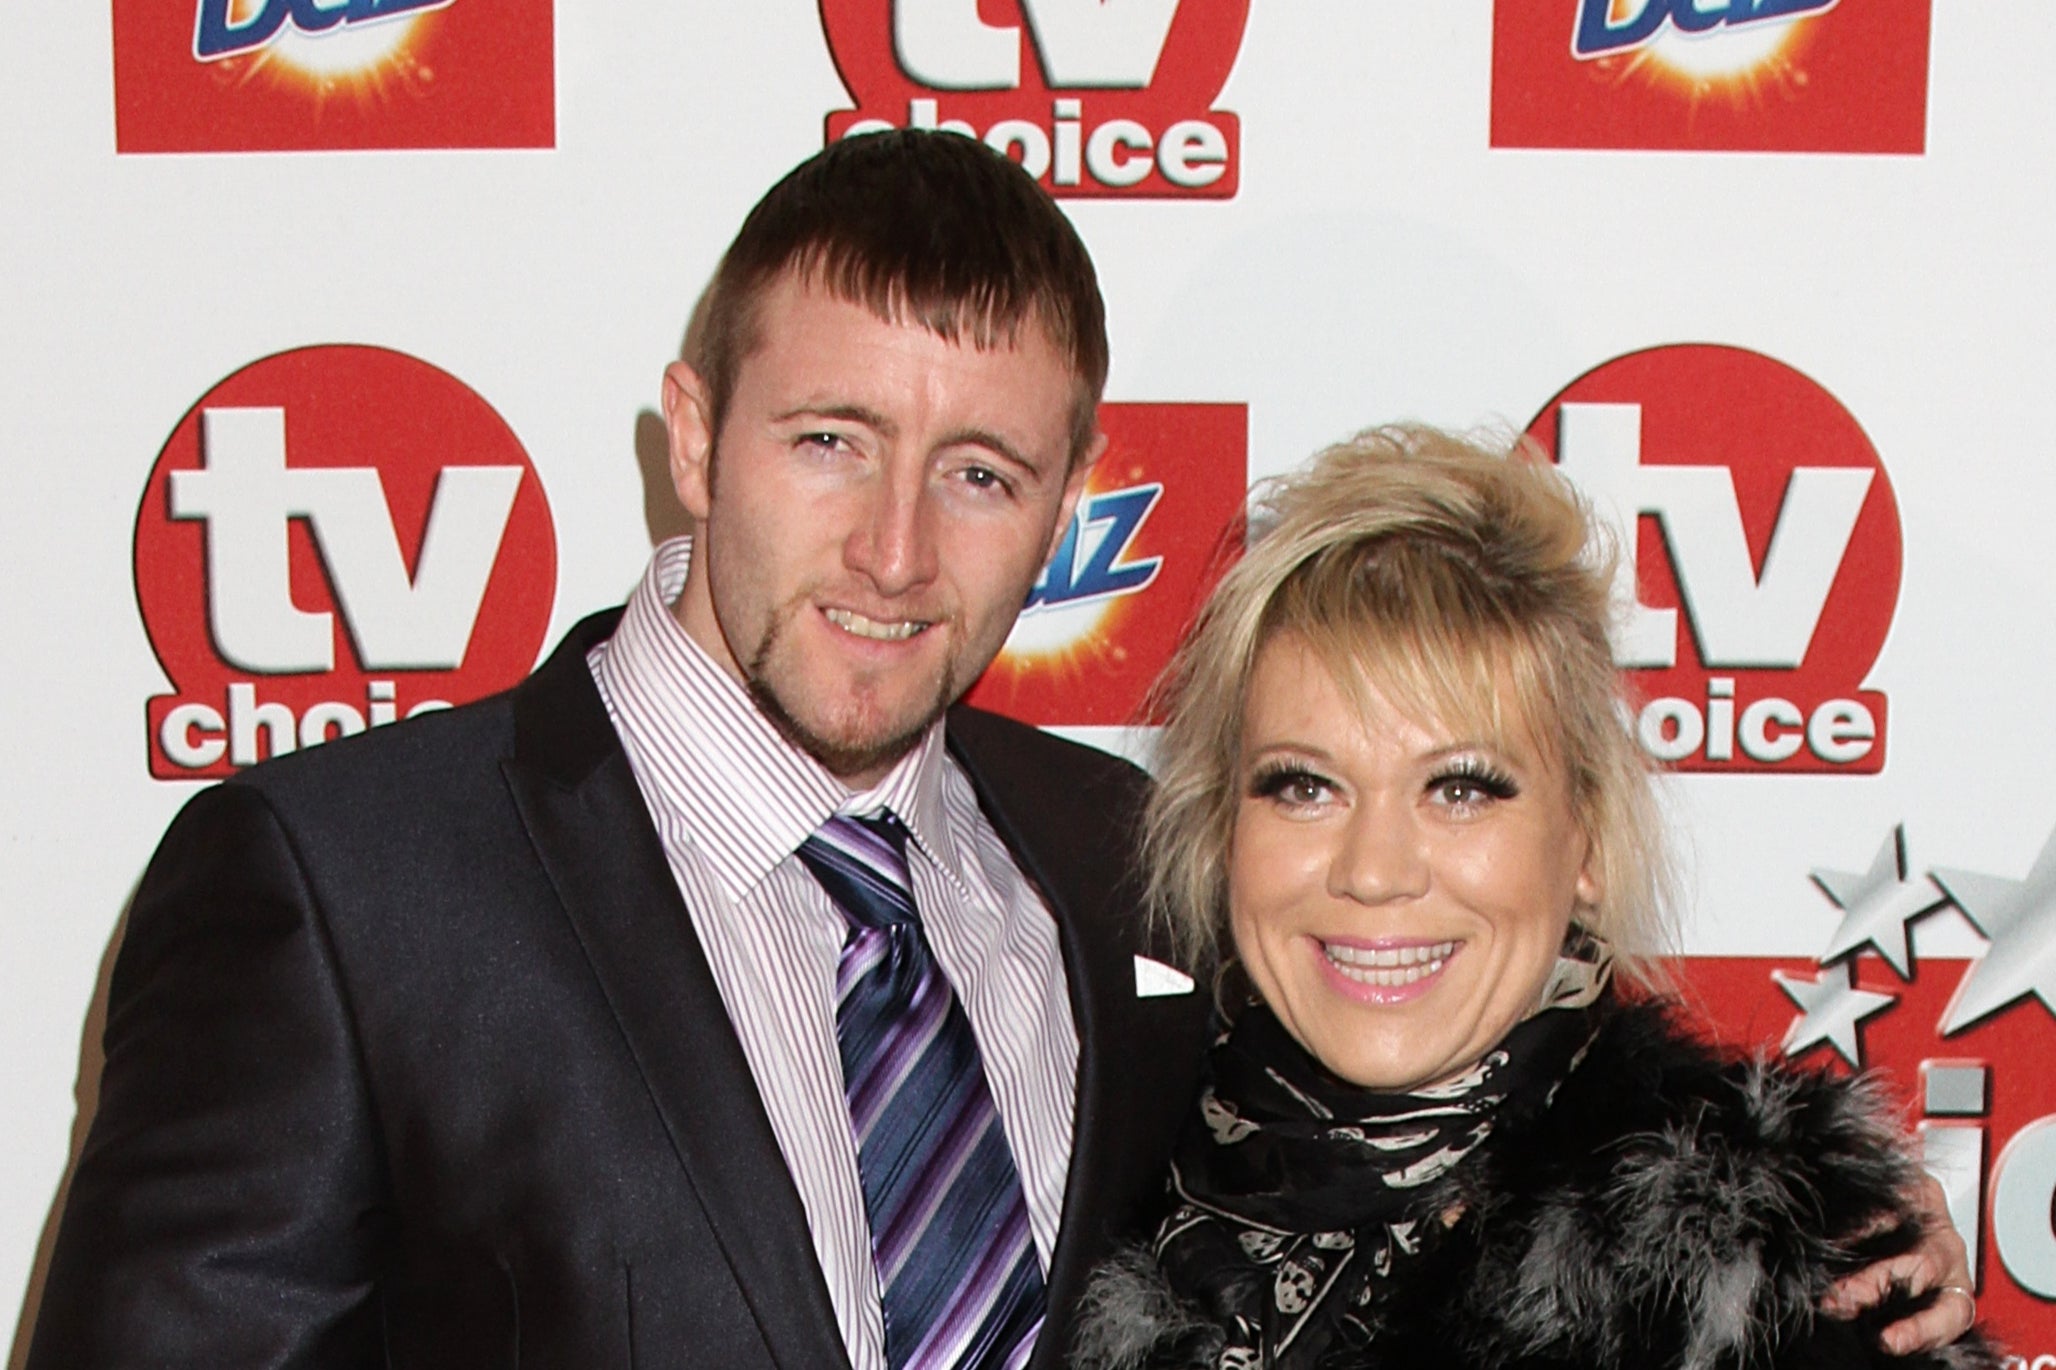 tina malone, suicide, depression, anxiety, shameless star tina malone says husband paul chase died by suicide